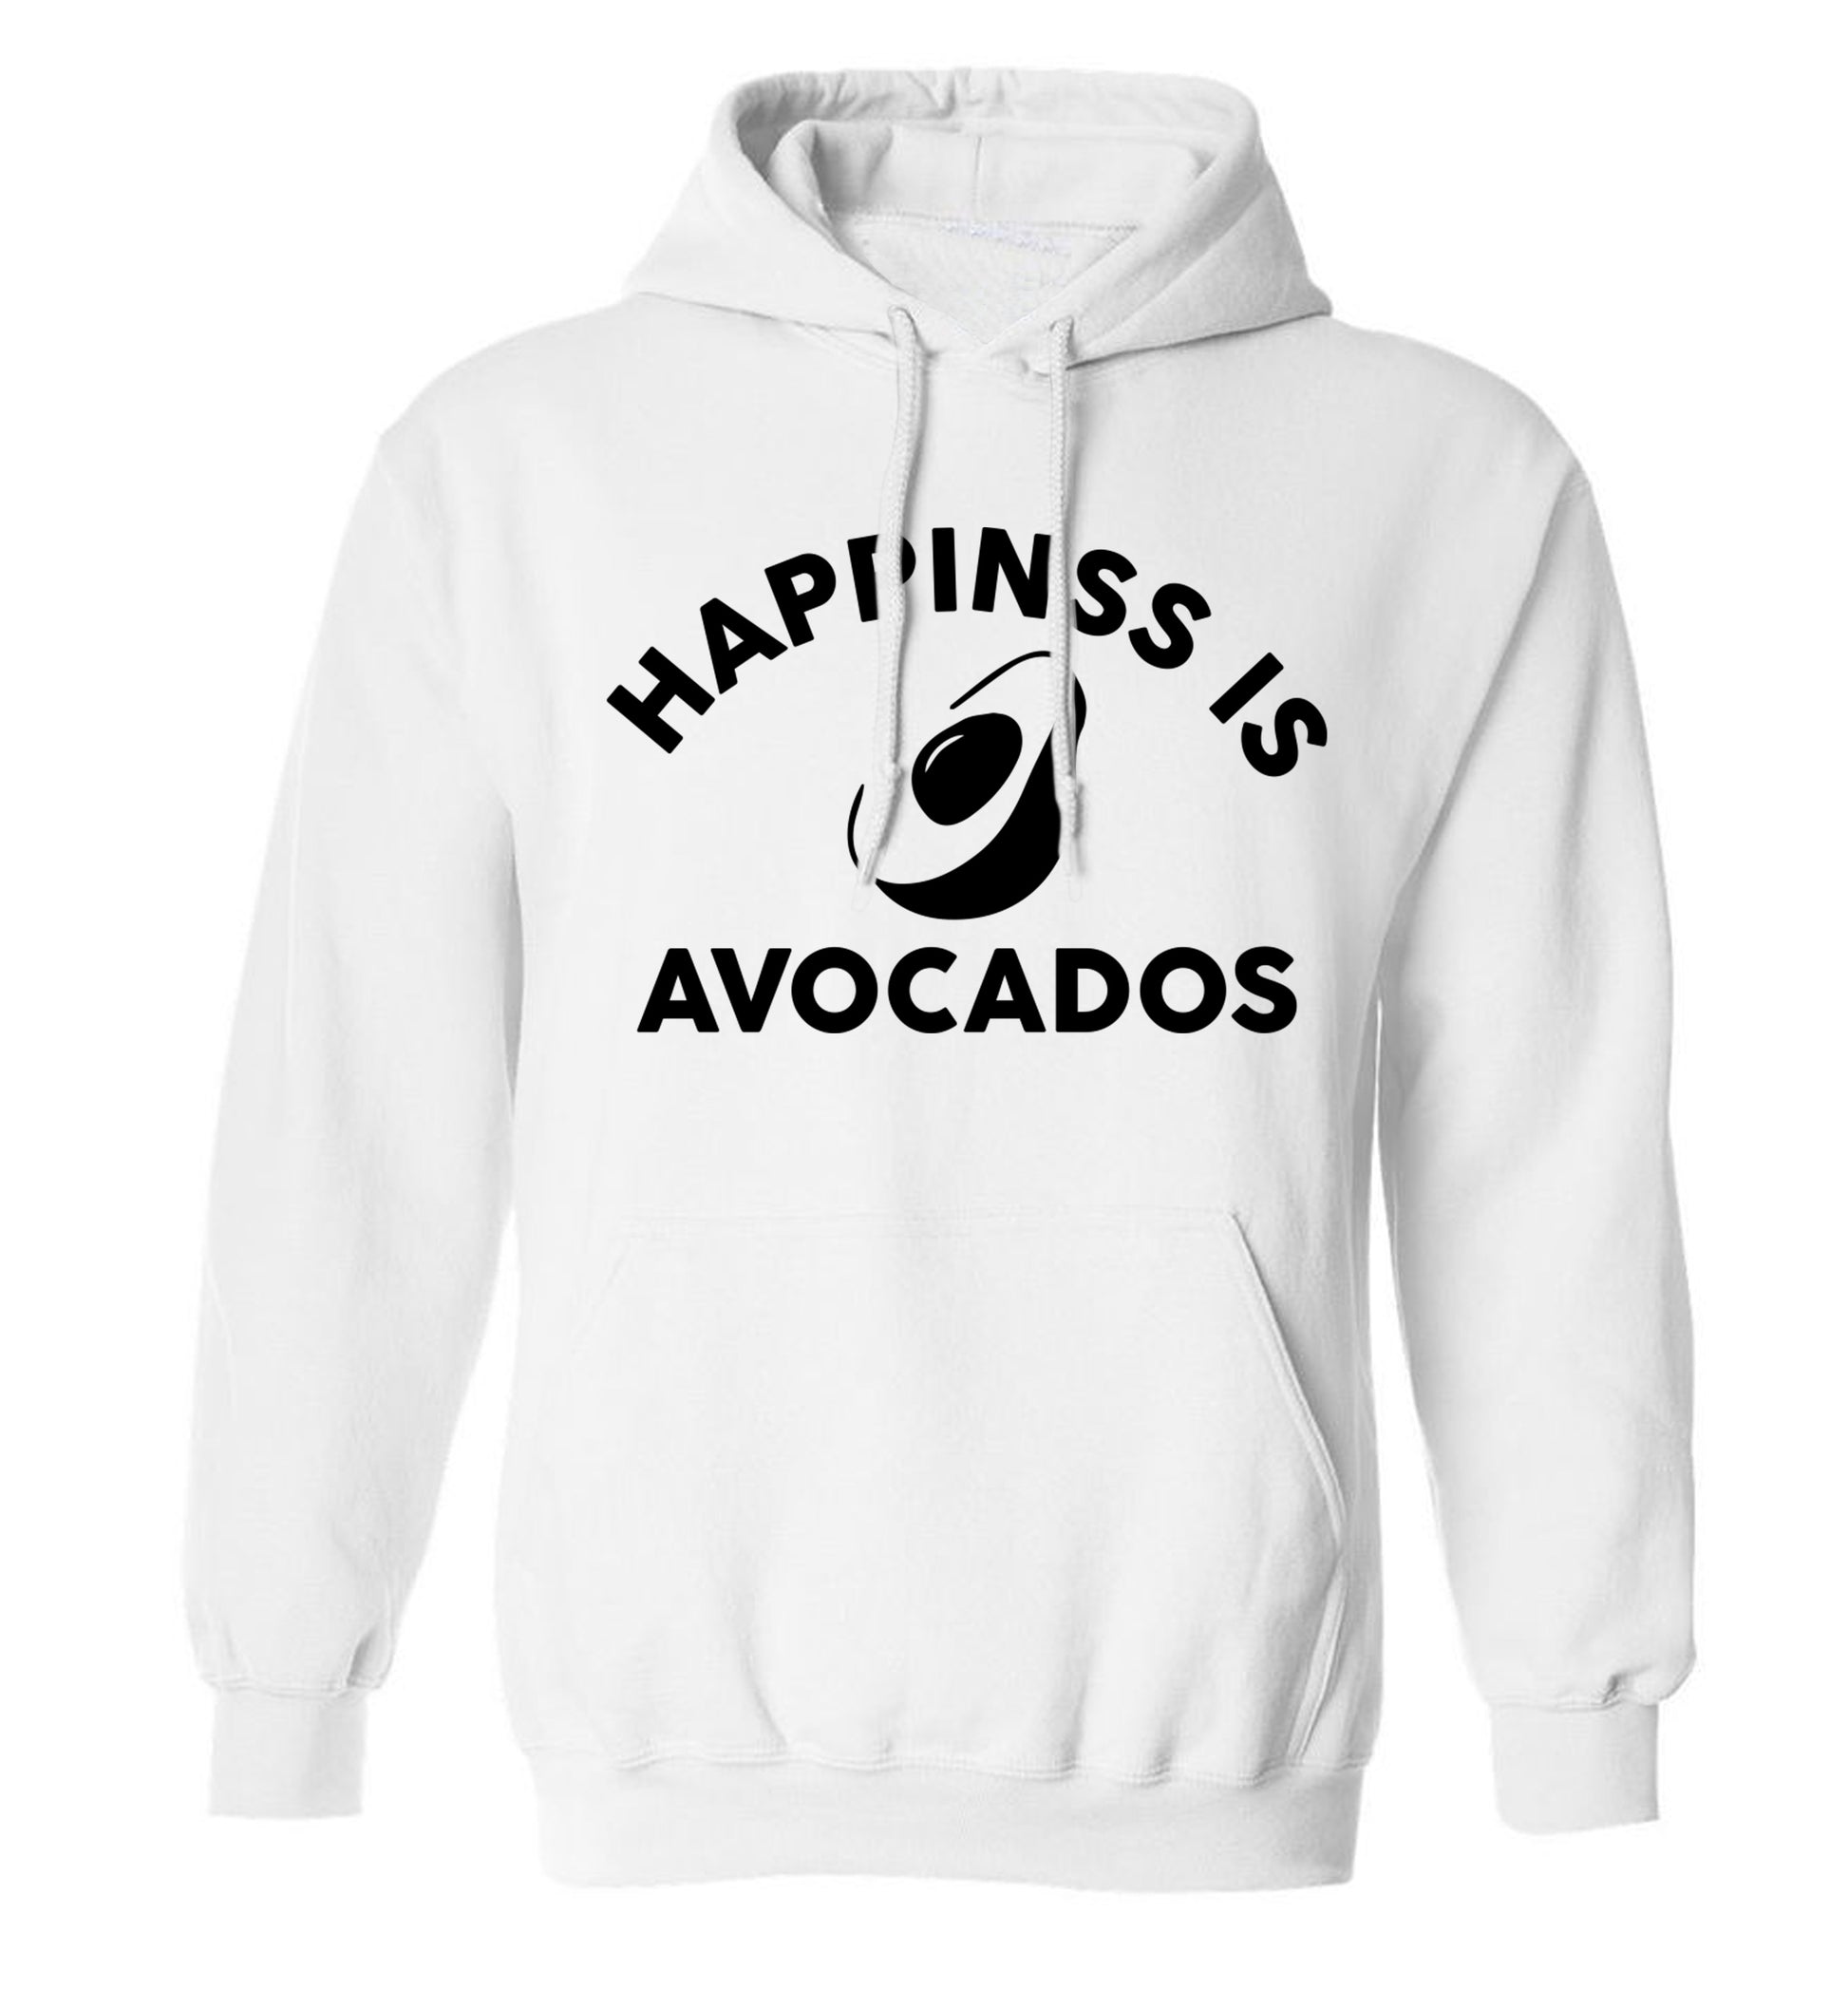 Happiness is avocados adults unisex white hoodie 2XL